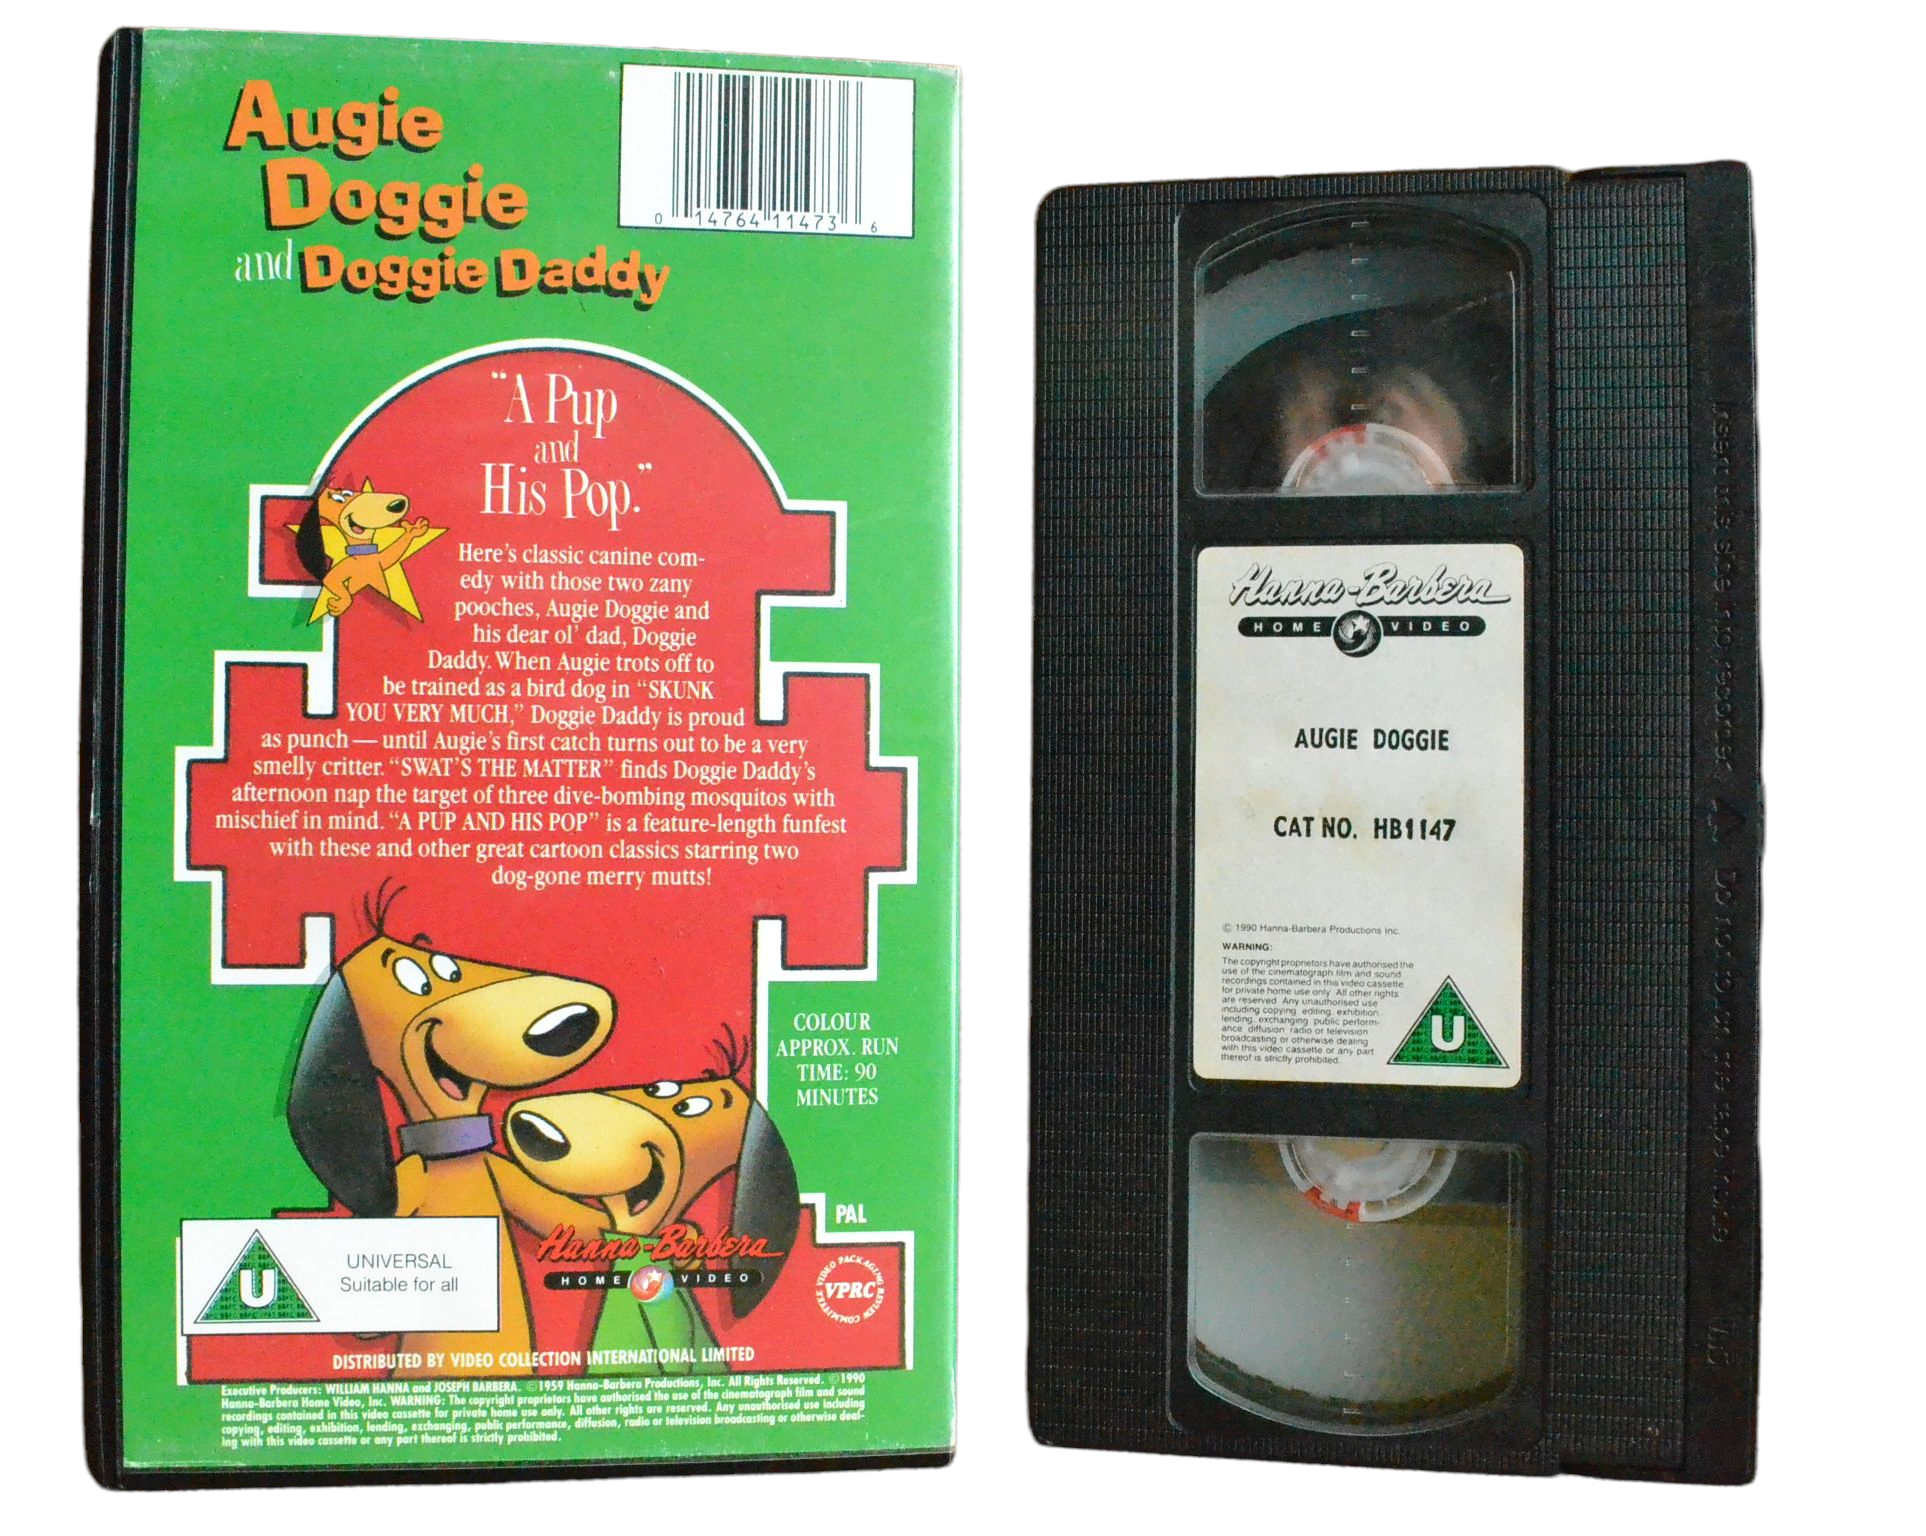 Augie Doggie And Doggie Daddy: A Pup And His Pop - Hanna Barbera - Vintage  - Pal VHS 014764114736 â€“ Golden Class Movies LTD